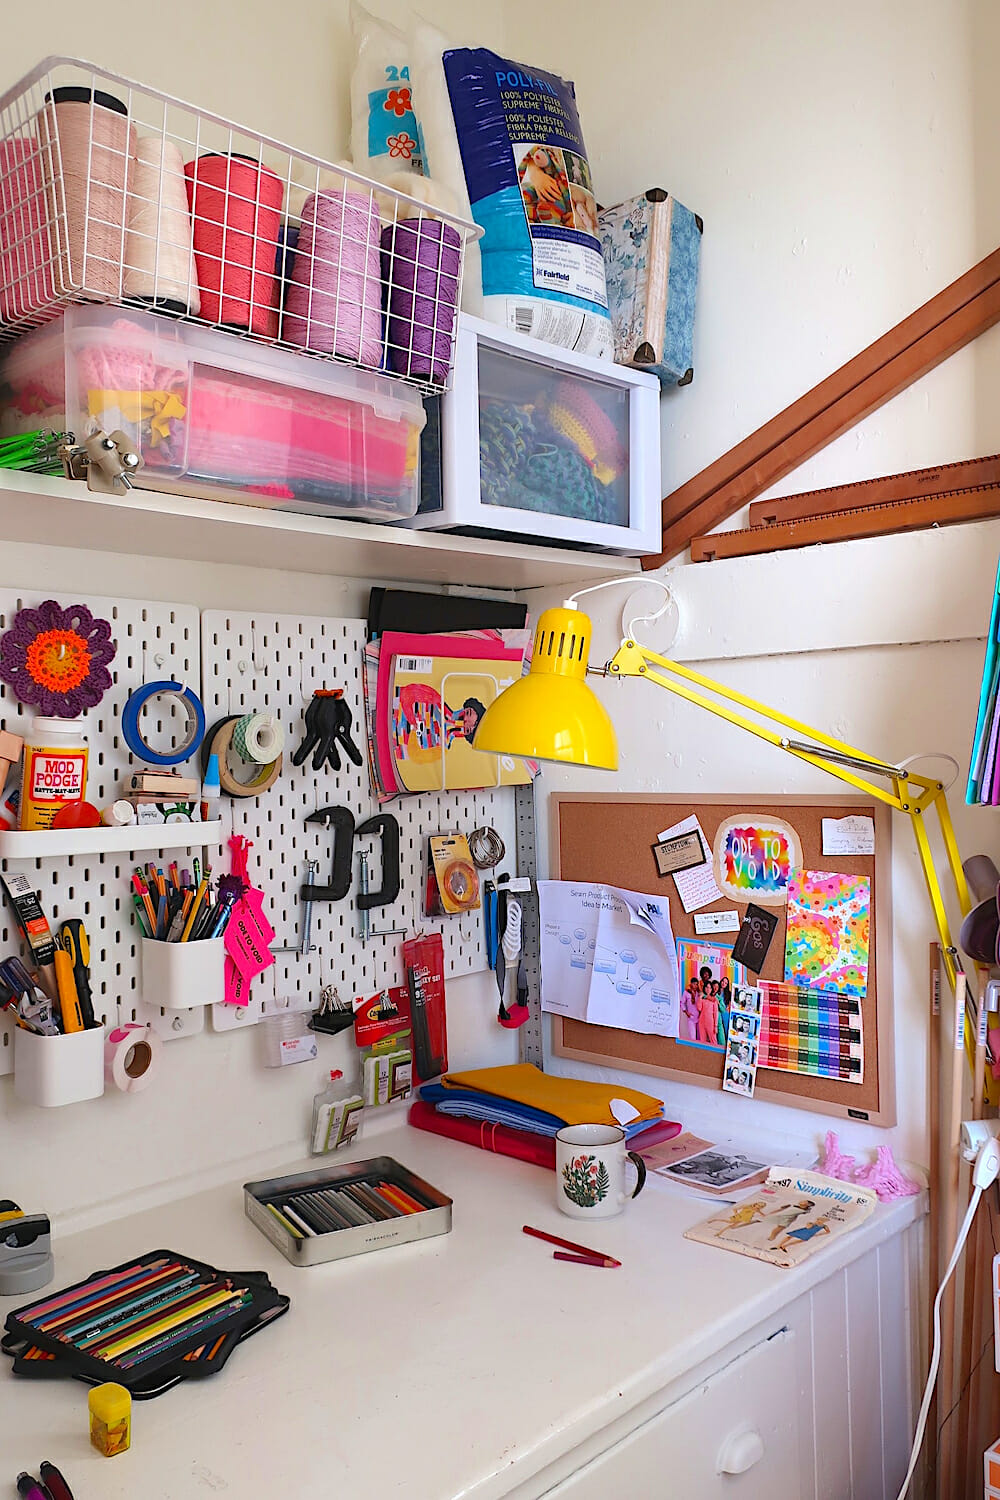 Photo of Kelsey's desk with a yellow lamp and colored pencils and a shelf holding pink spools of yarn.